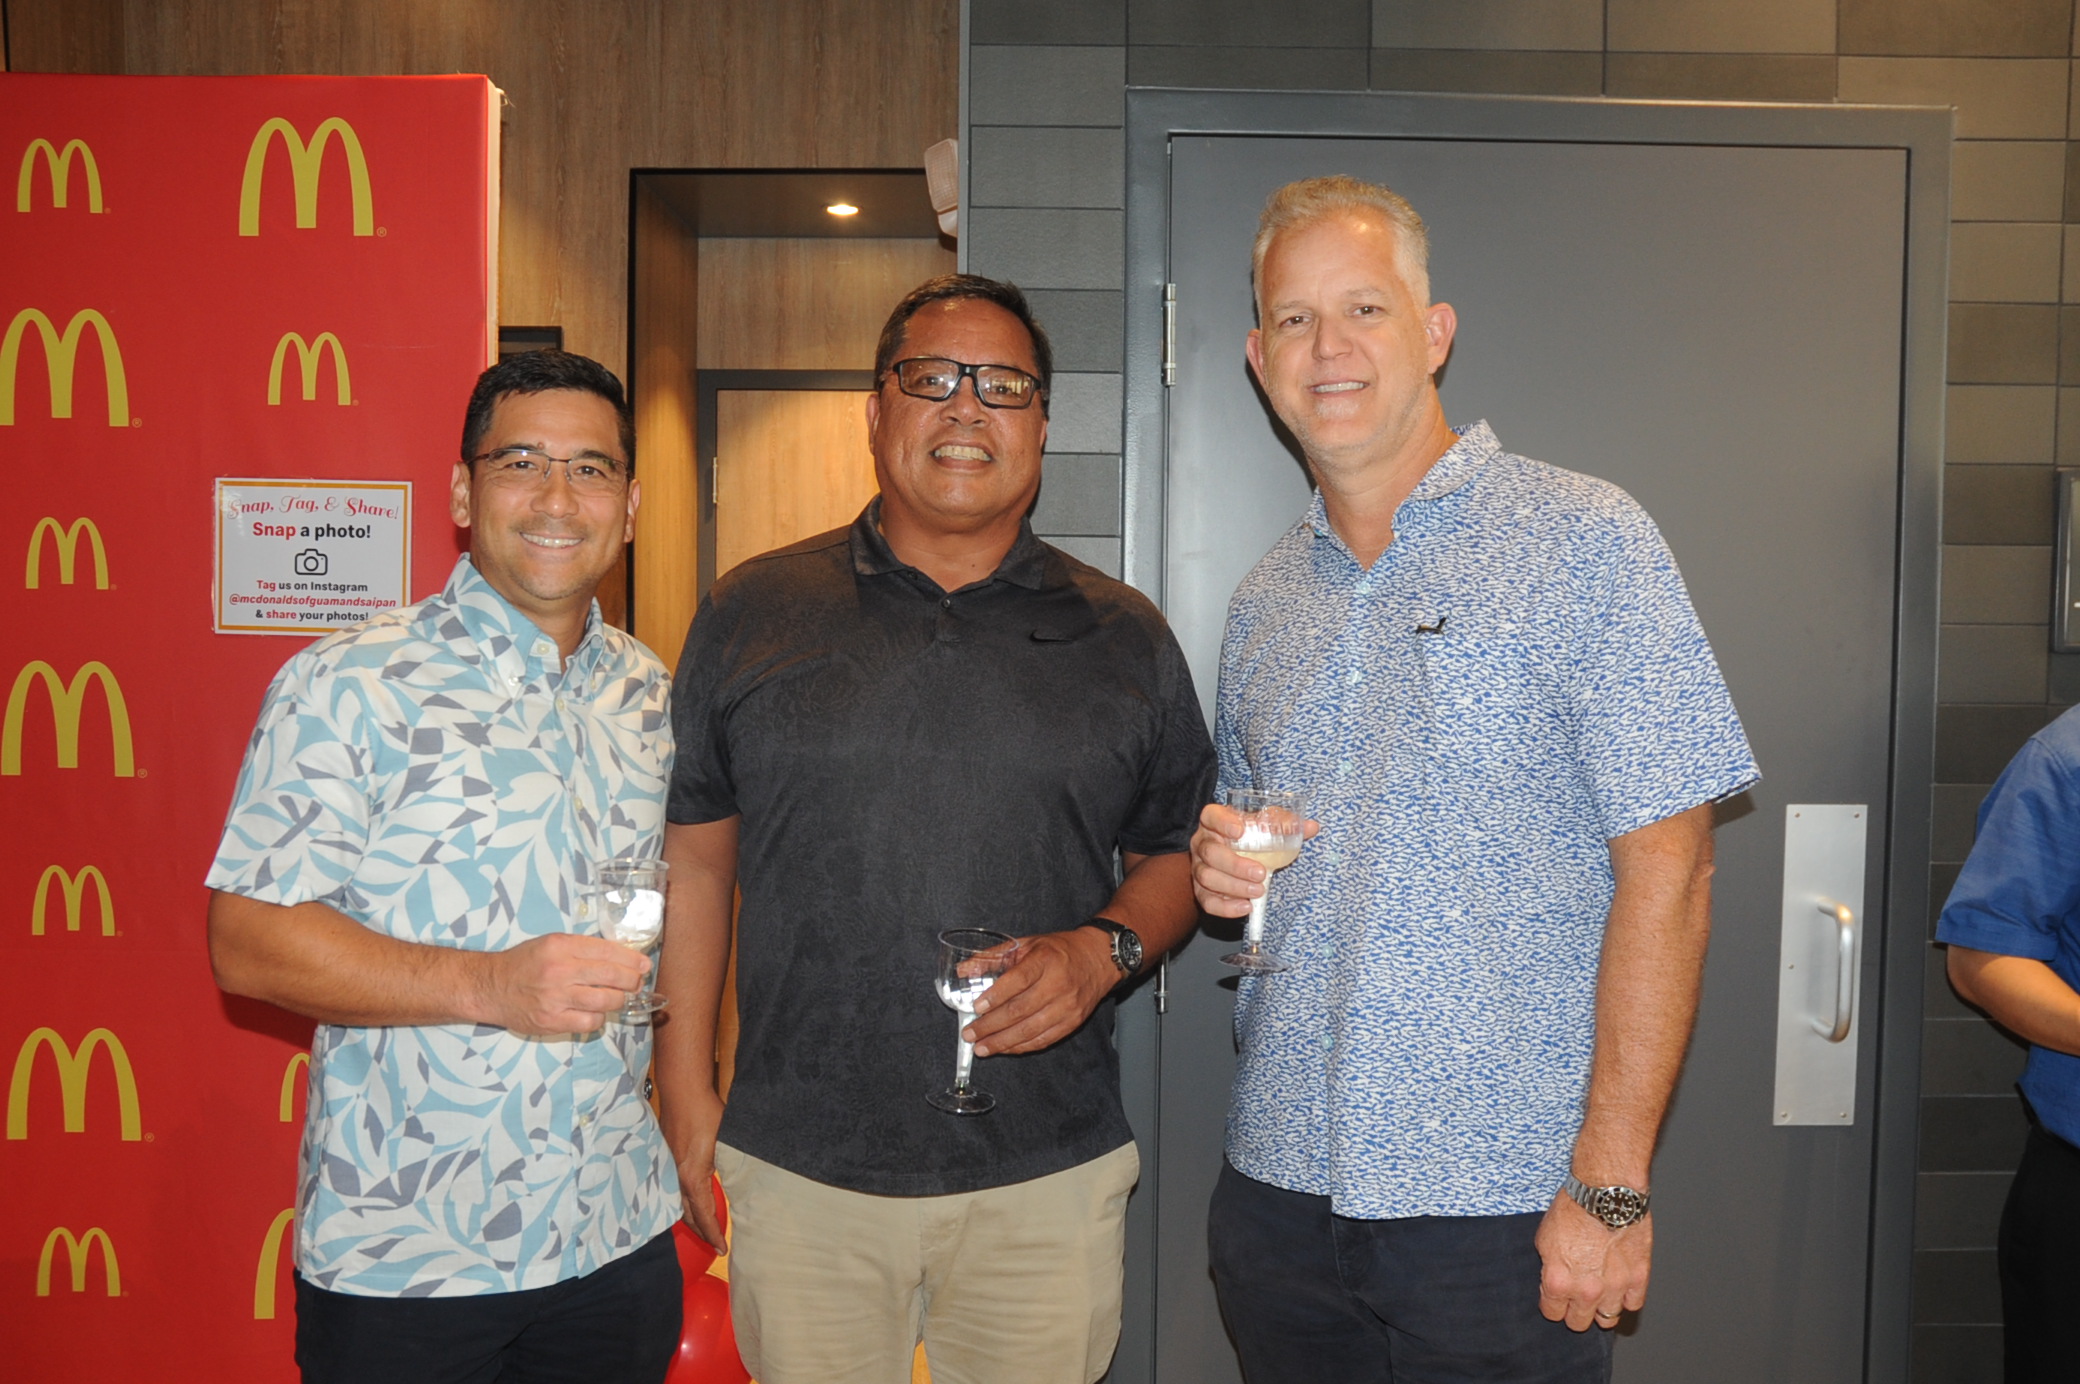 (From left) Patrick Bulaon, vice president and general manager for Guam &amp; Micronesia, Matson Navigation Co.; Jay Santos, general manager, Triple J Saipan; and Jay B. Jones, senior vice president for Triple J Enterprises Inc. 